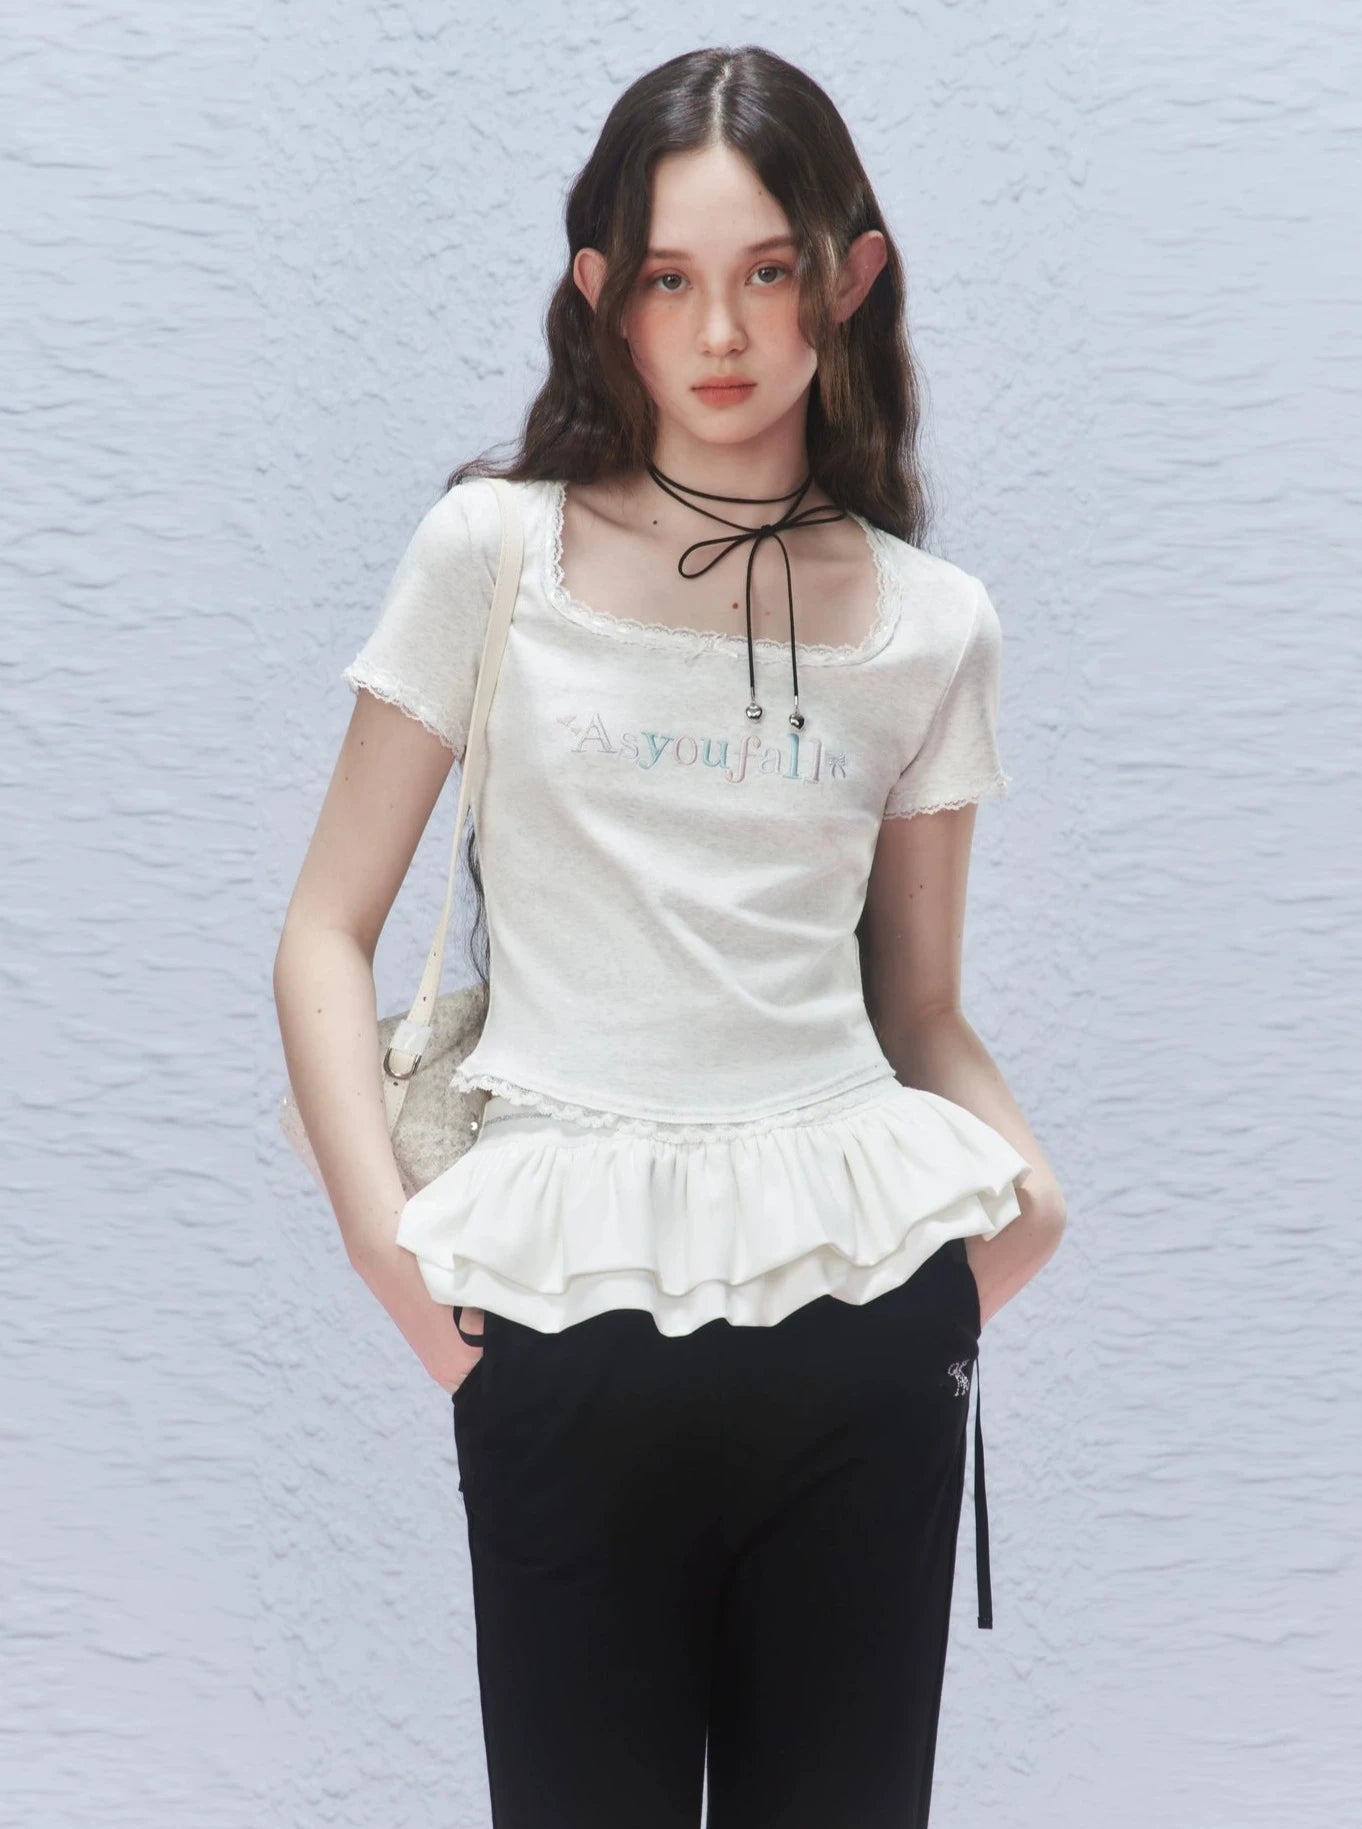 French Embroidery Cropped T-Shirt